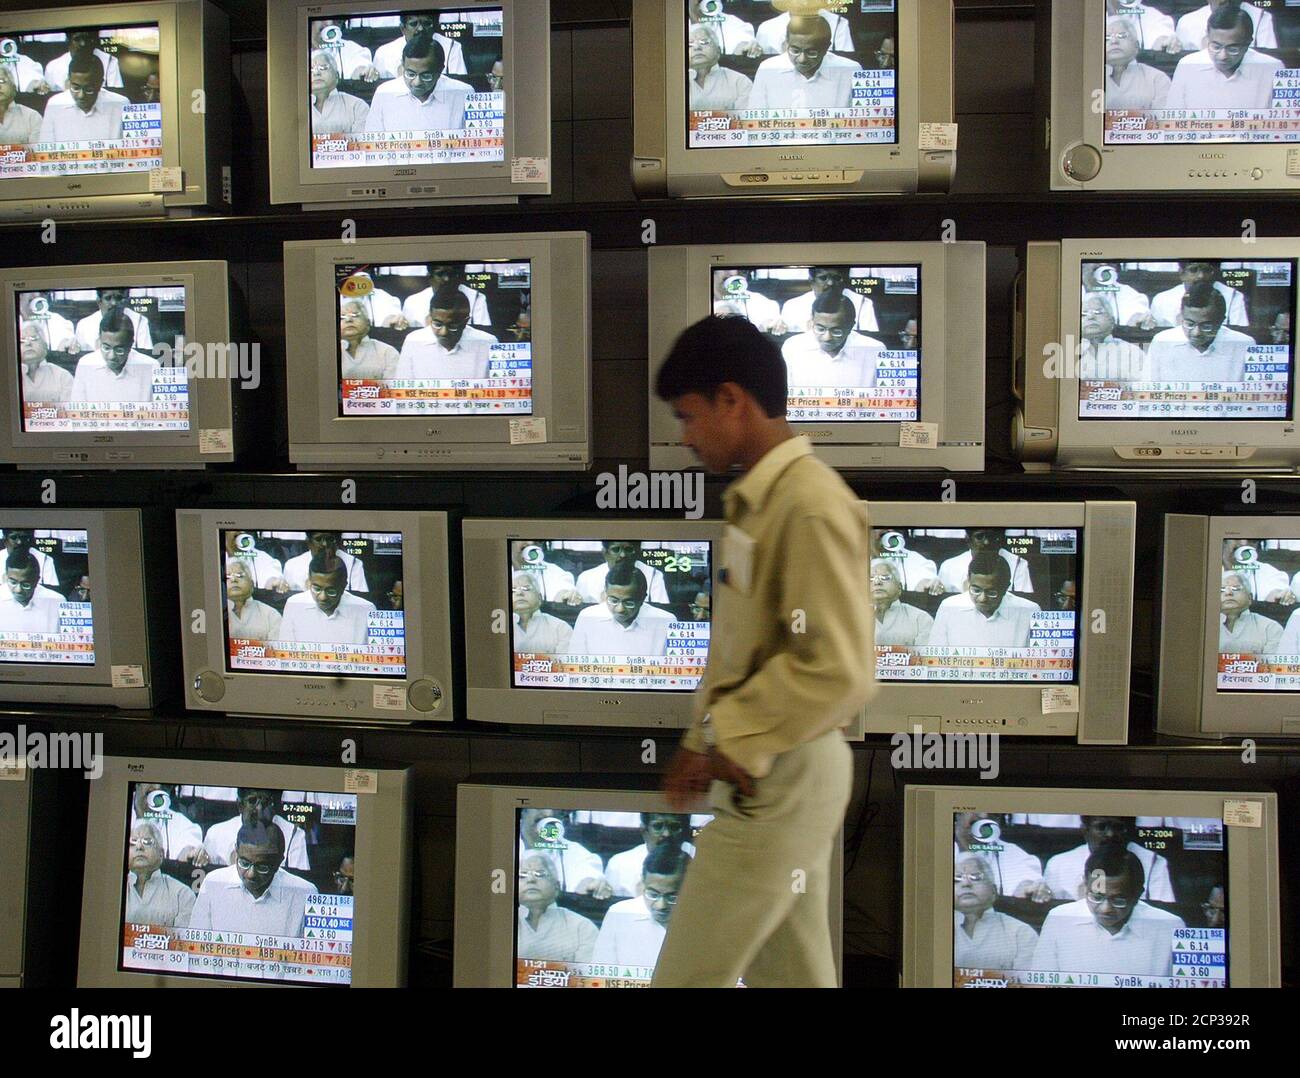 A salesman at an electronic goods shop walks past television sets showing the speech of Indian Finance Minister Palanippan Chidambaram, as he presents the budget in parliament for the fiscal year 2004-05 in Bombay, July 8, 2004. Chidambaram called for sustaining economic growth of 7-8 percent in Asia's third-largest economy when unveiling the budget.REUTERS/Arko Datta  AD/TW Stock Photo